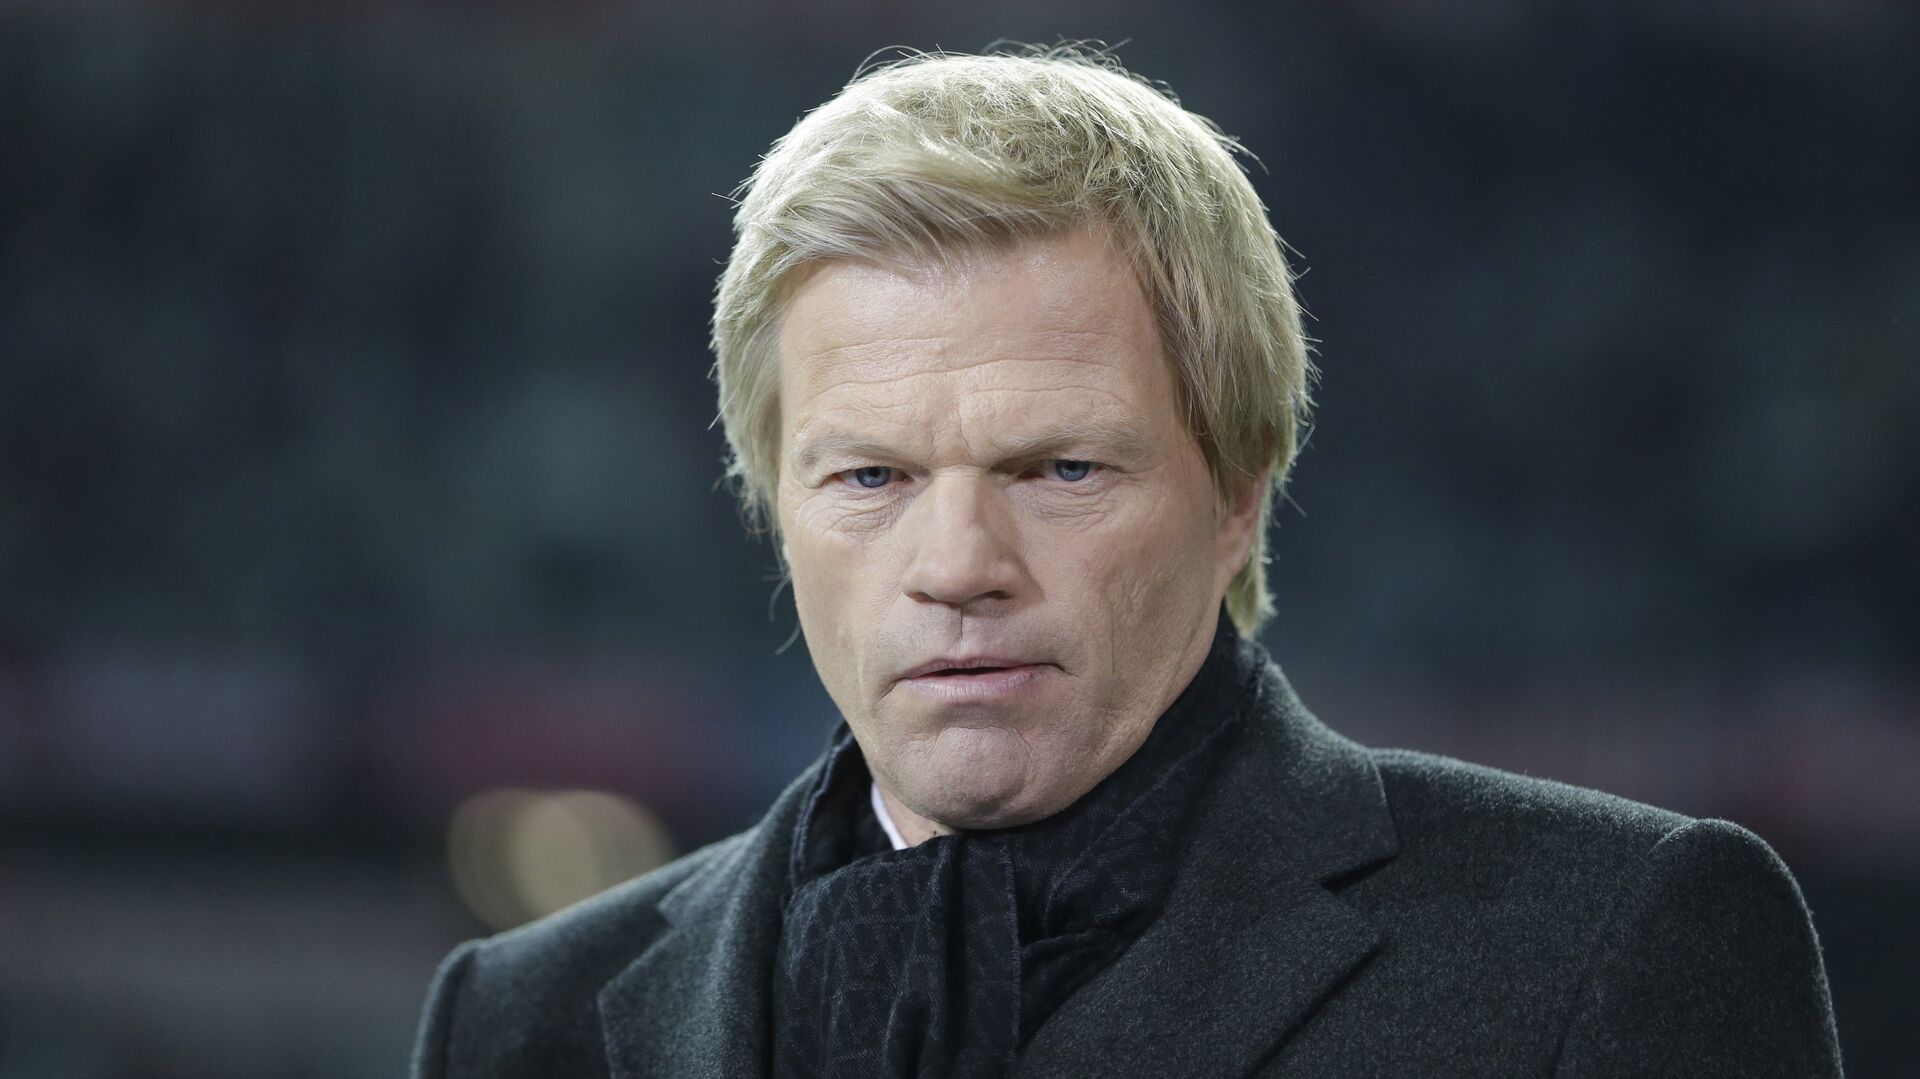 Former Bayern Munich goalkeeper and TV sports moderator Oliver Kahn is waiting for an interview prior to the soccer Champions League group F match between FC Bayern Munich and OSC Lille in Munich, Germany, Wednesday, Nov. 7, 2012 - اسپوتنیک افغانستان  , 1920, 07.07.2022